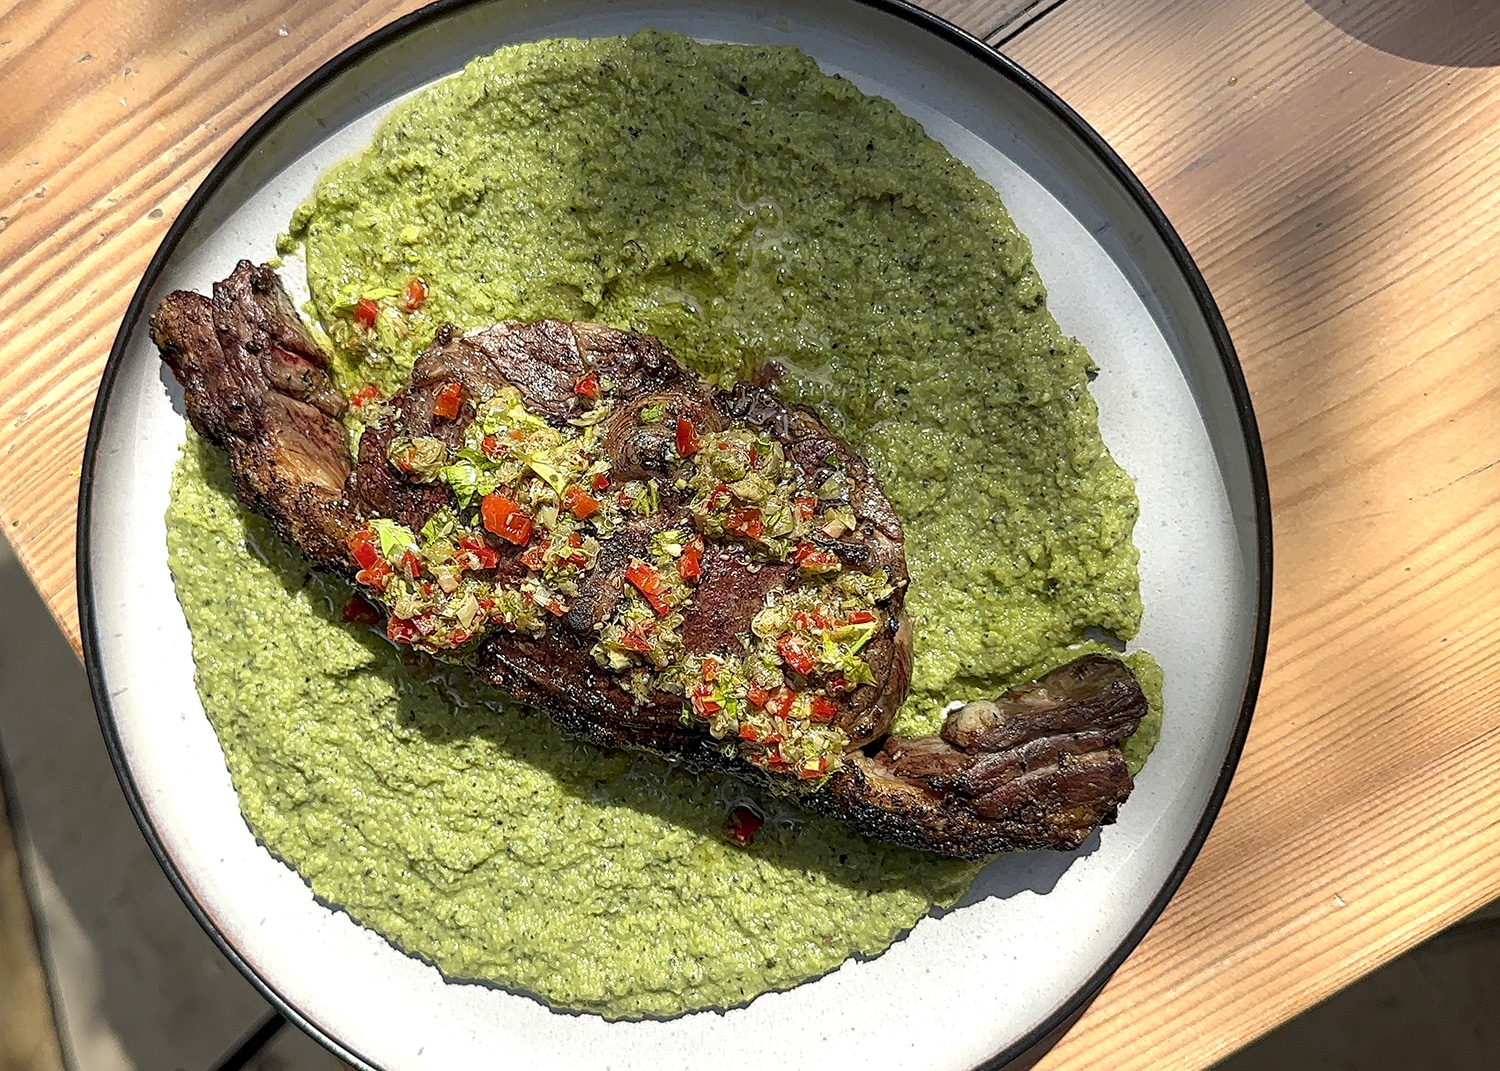 Grilled Barnsley lamb chop with pea & mint puree, made with Borough market ingredients